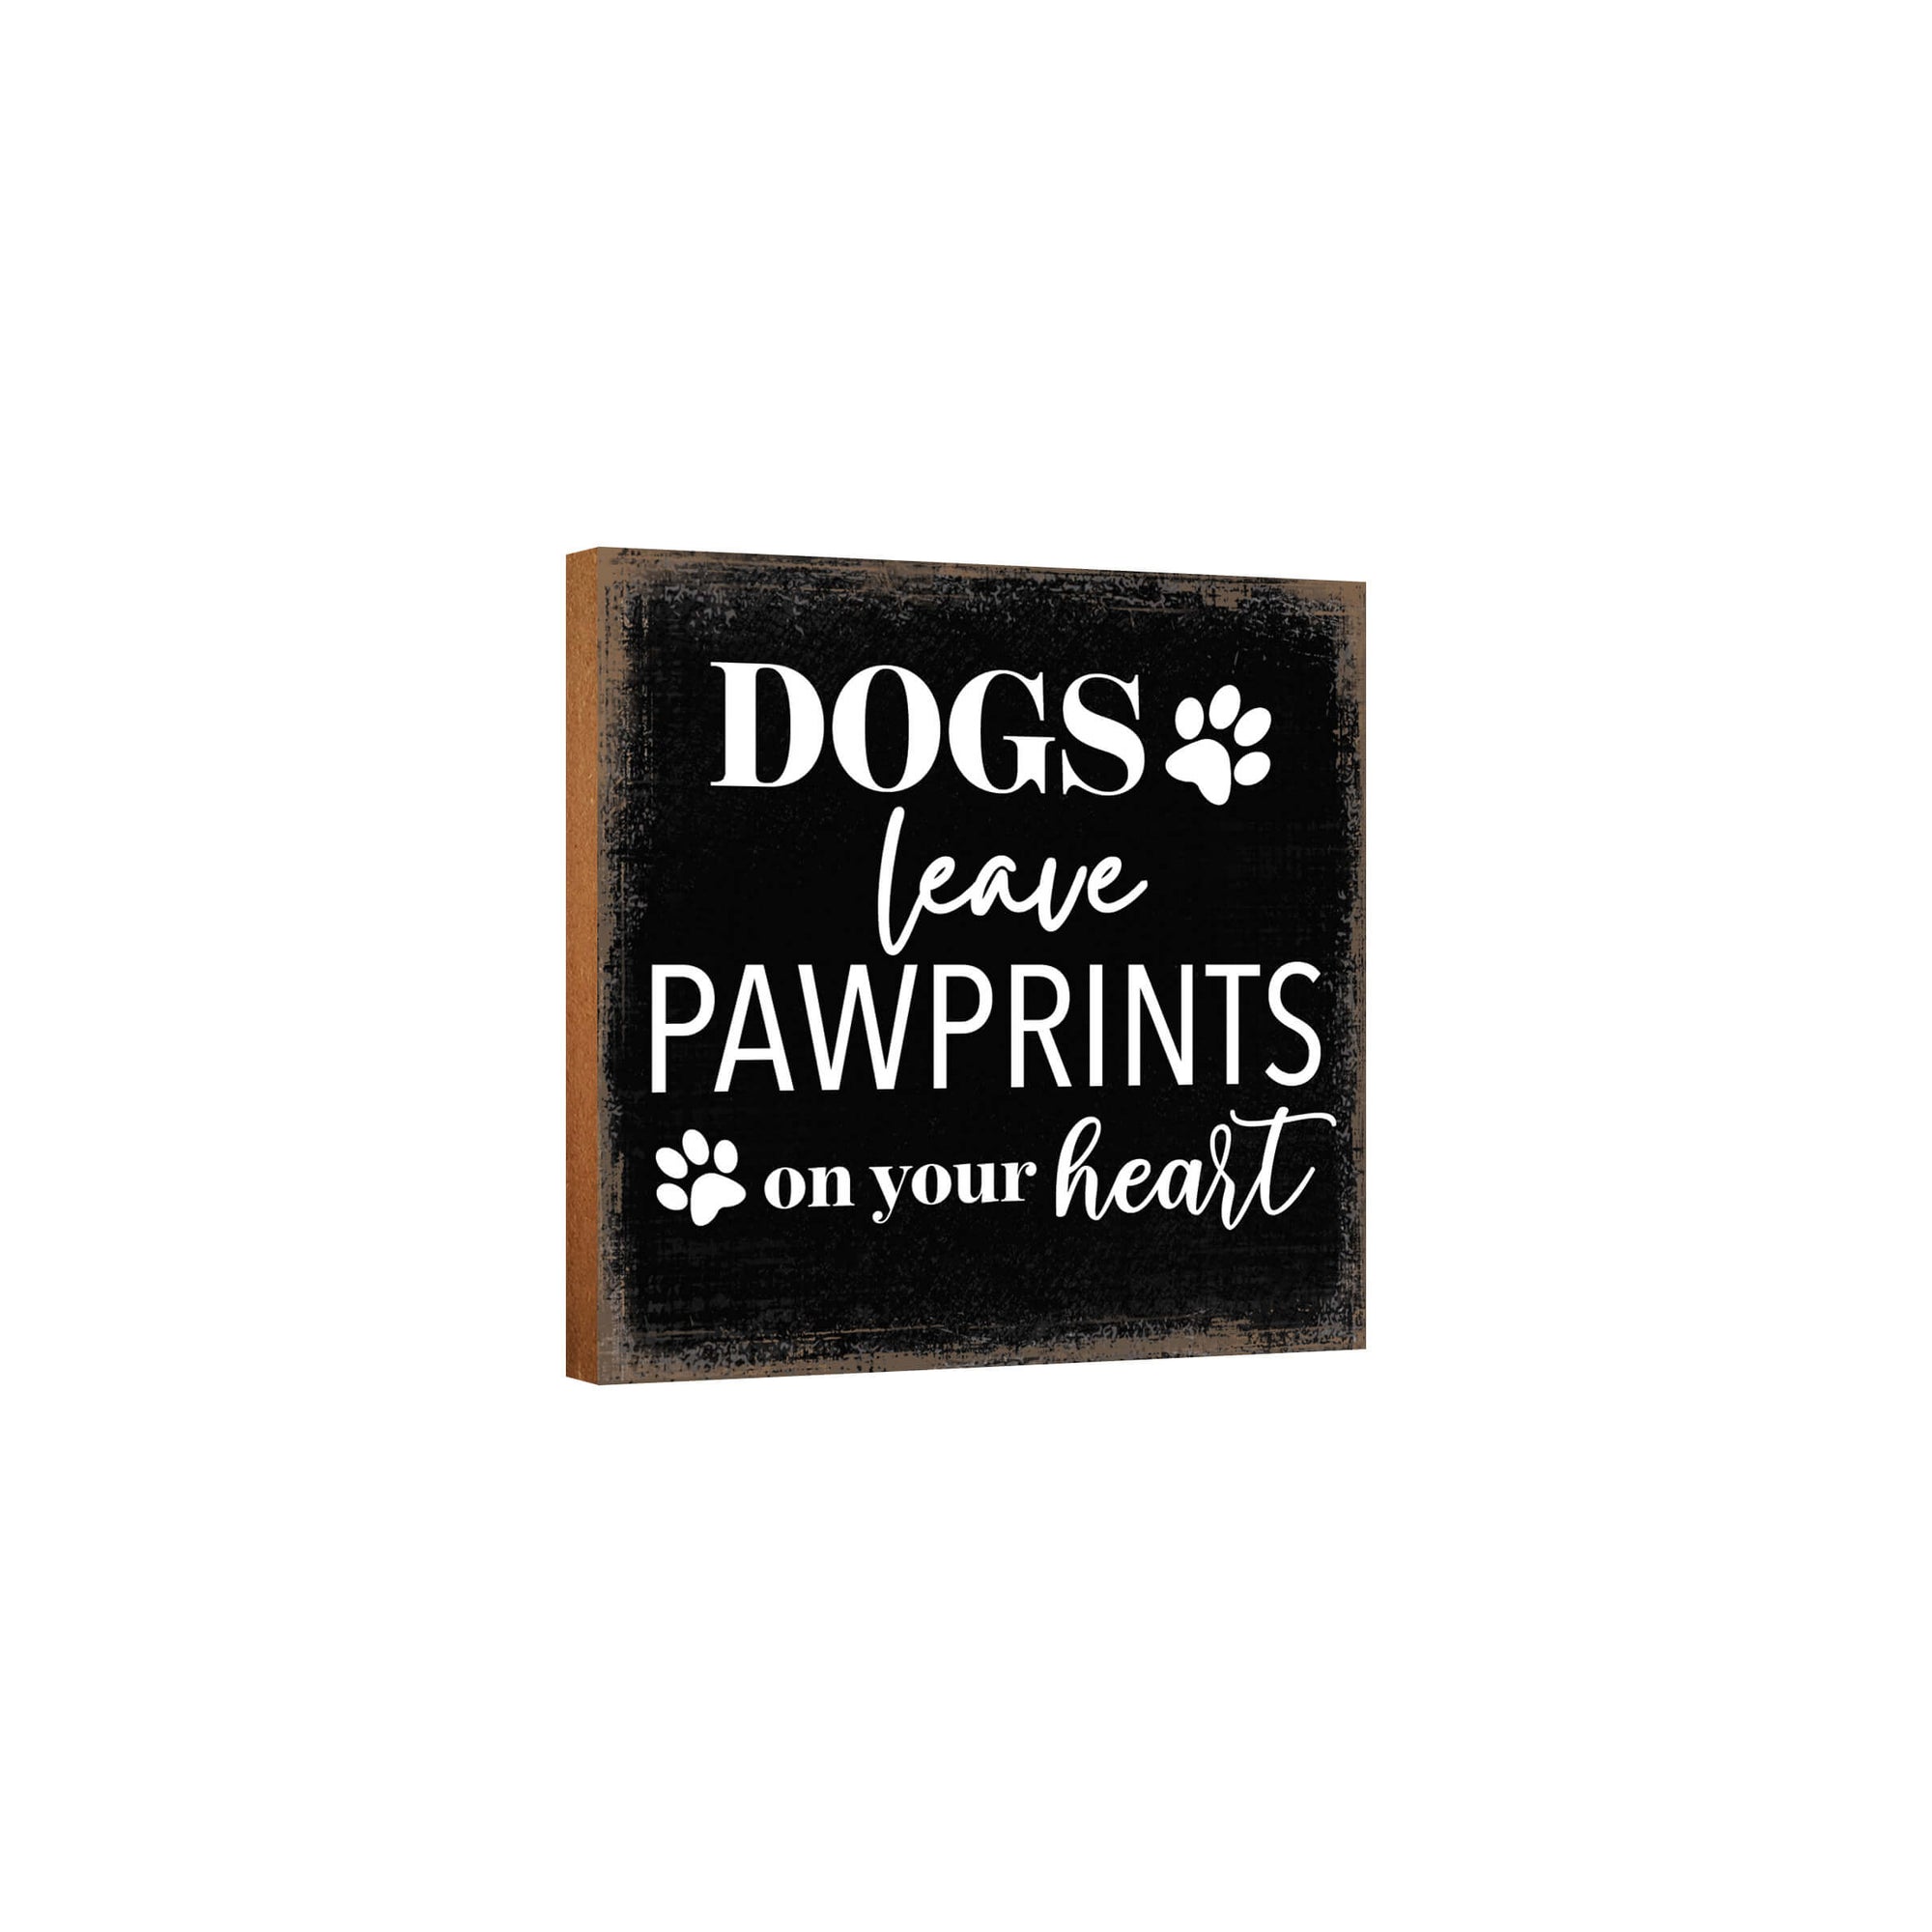 Wooden Shelf Decor and Tabletop Signs with Pet Verses - Pawprints On Your Heart